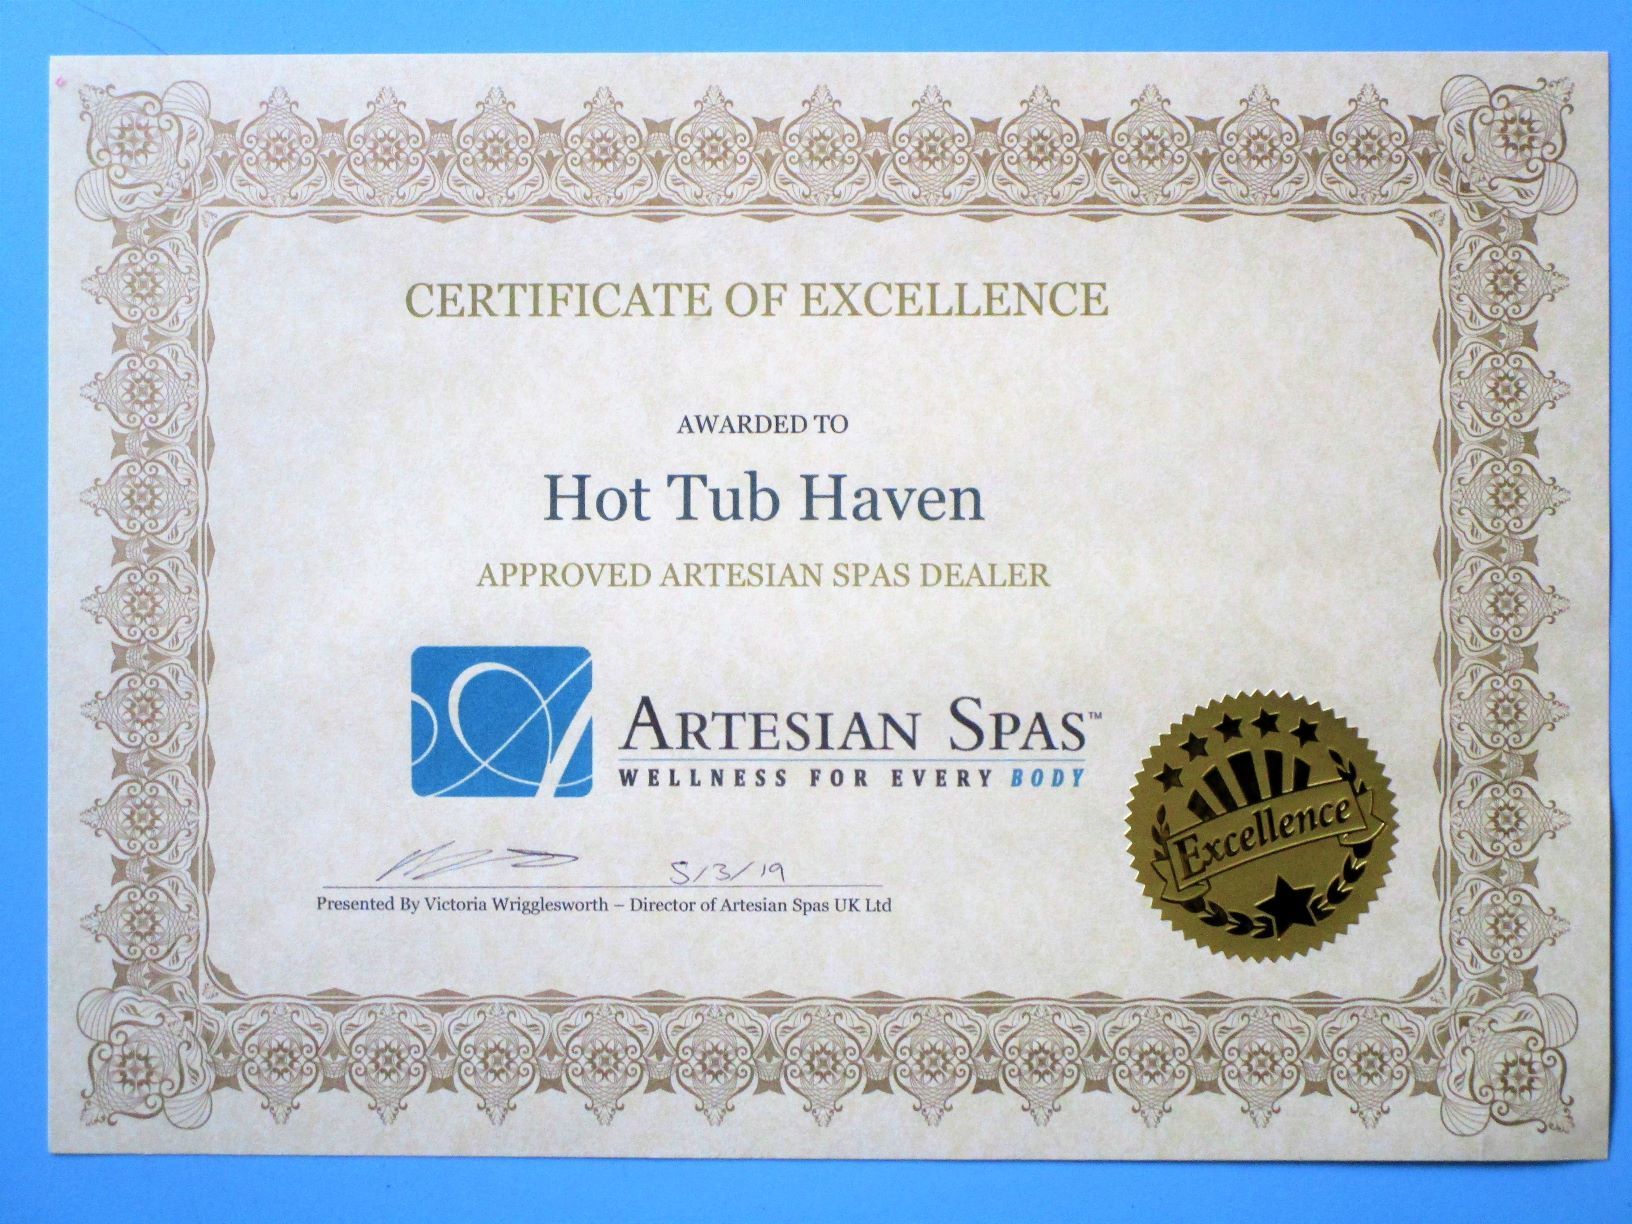 Hot Tub Haven Surrey Artesian Spas certificate of Excellence